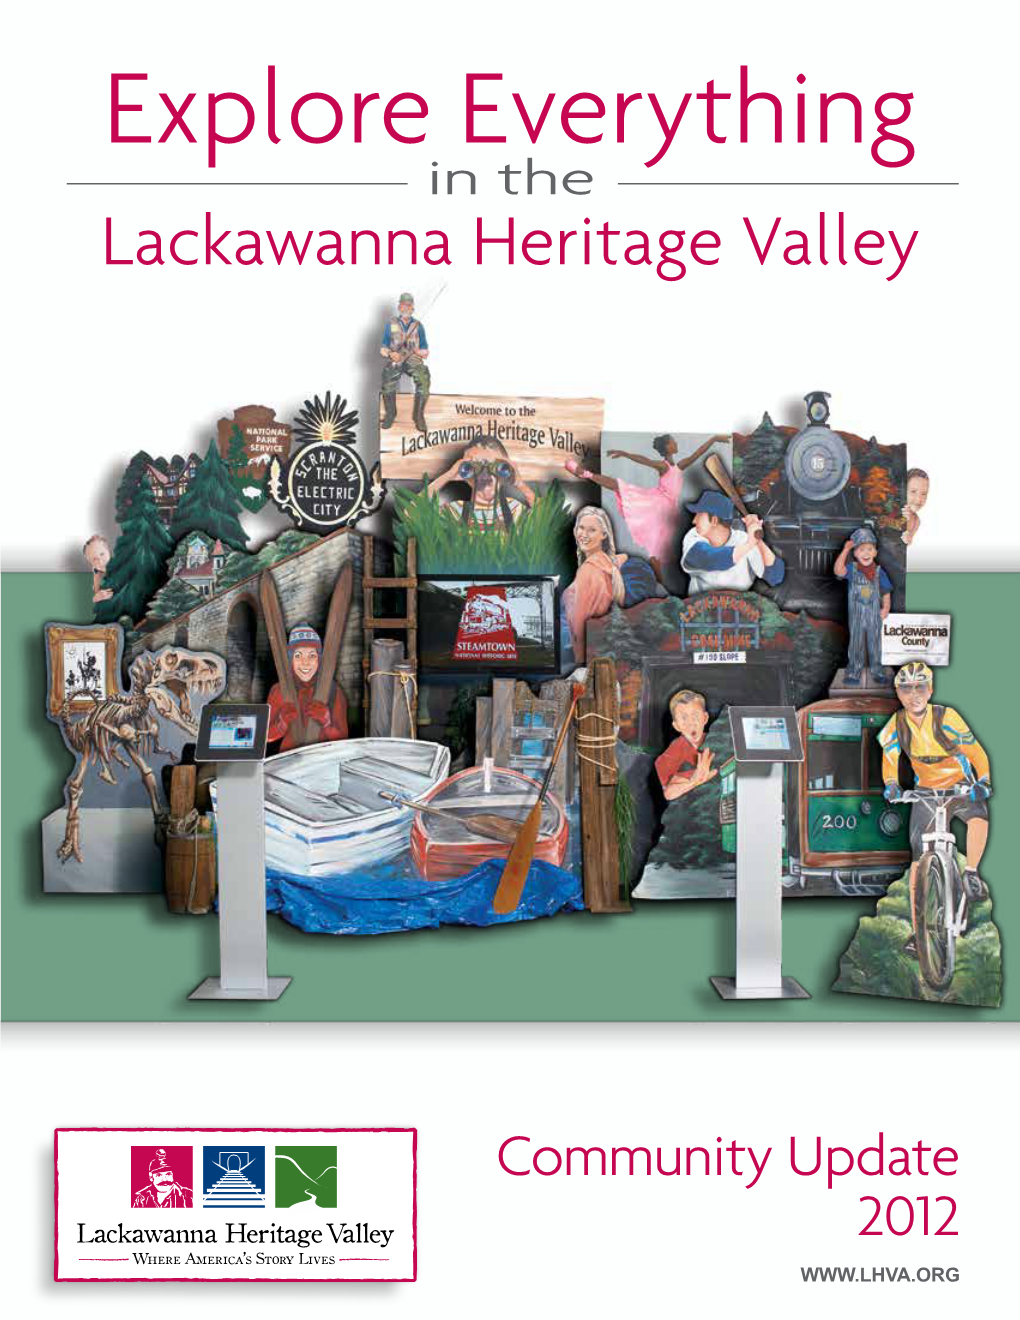 Explore Everything in the Lackawanna Heritage Valley